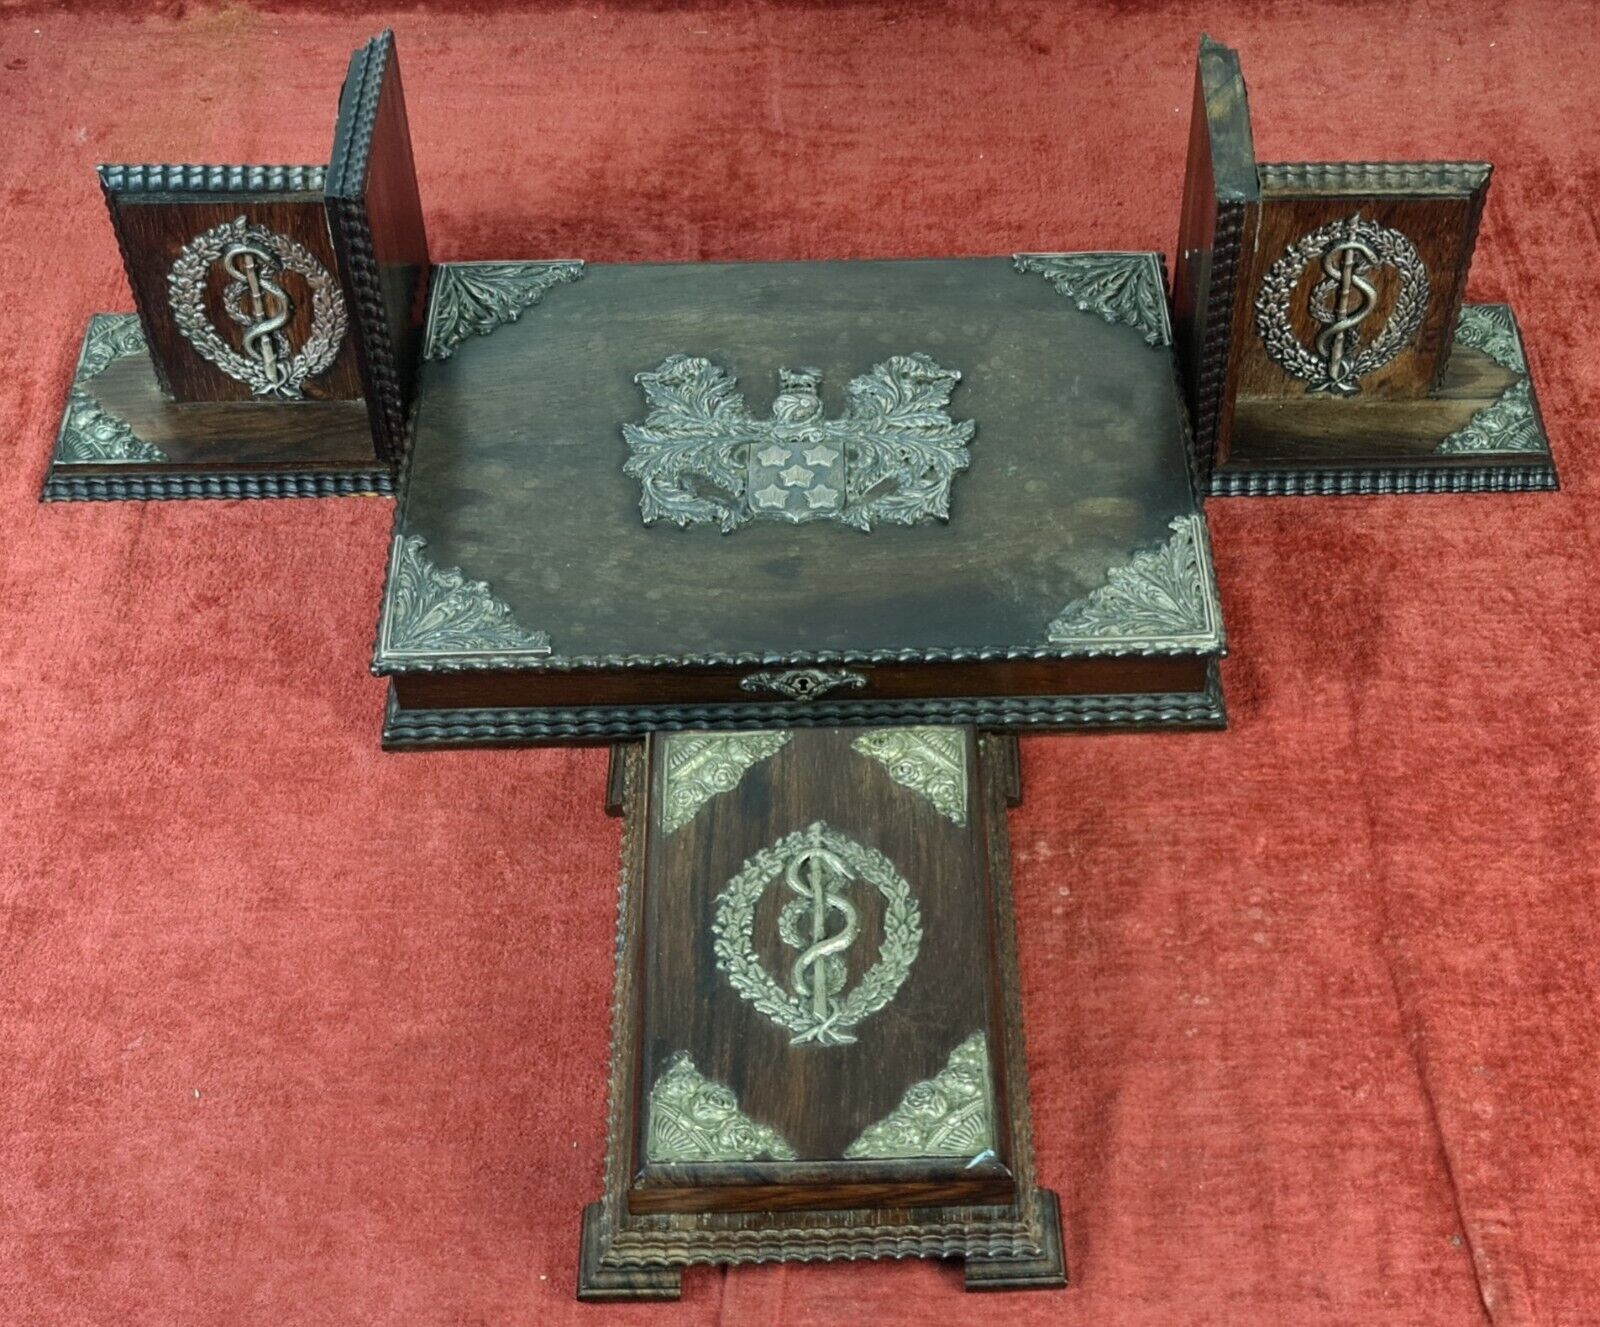 OFFICE SET. BOOK SUPPORT AND 2 BOXES. WOOD AND SILVER. PORTUGAL. XIX-XX CENTURY.